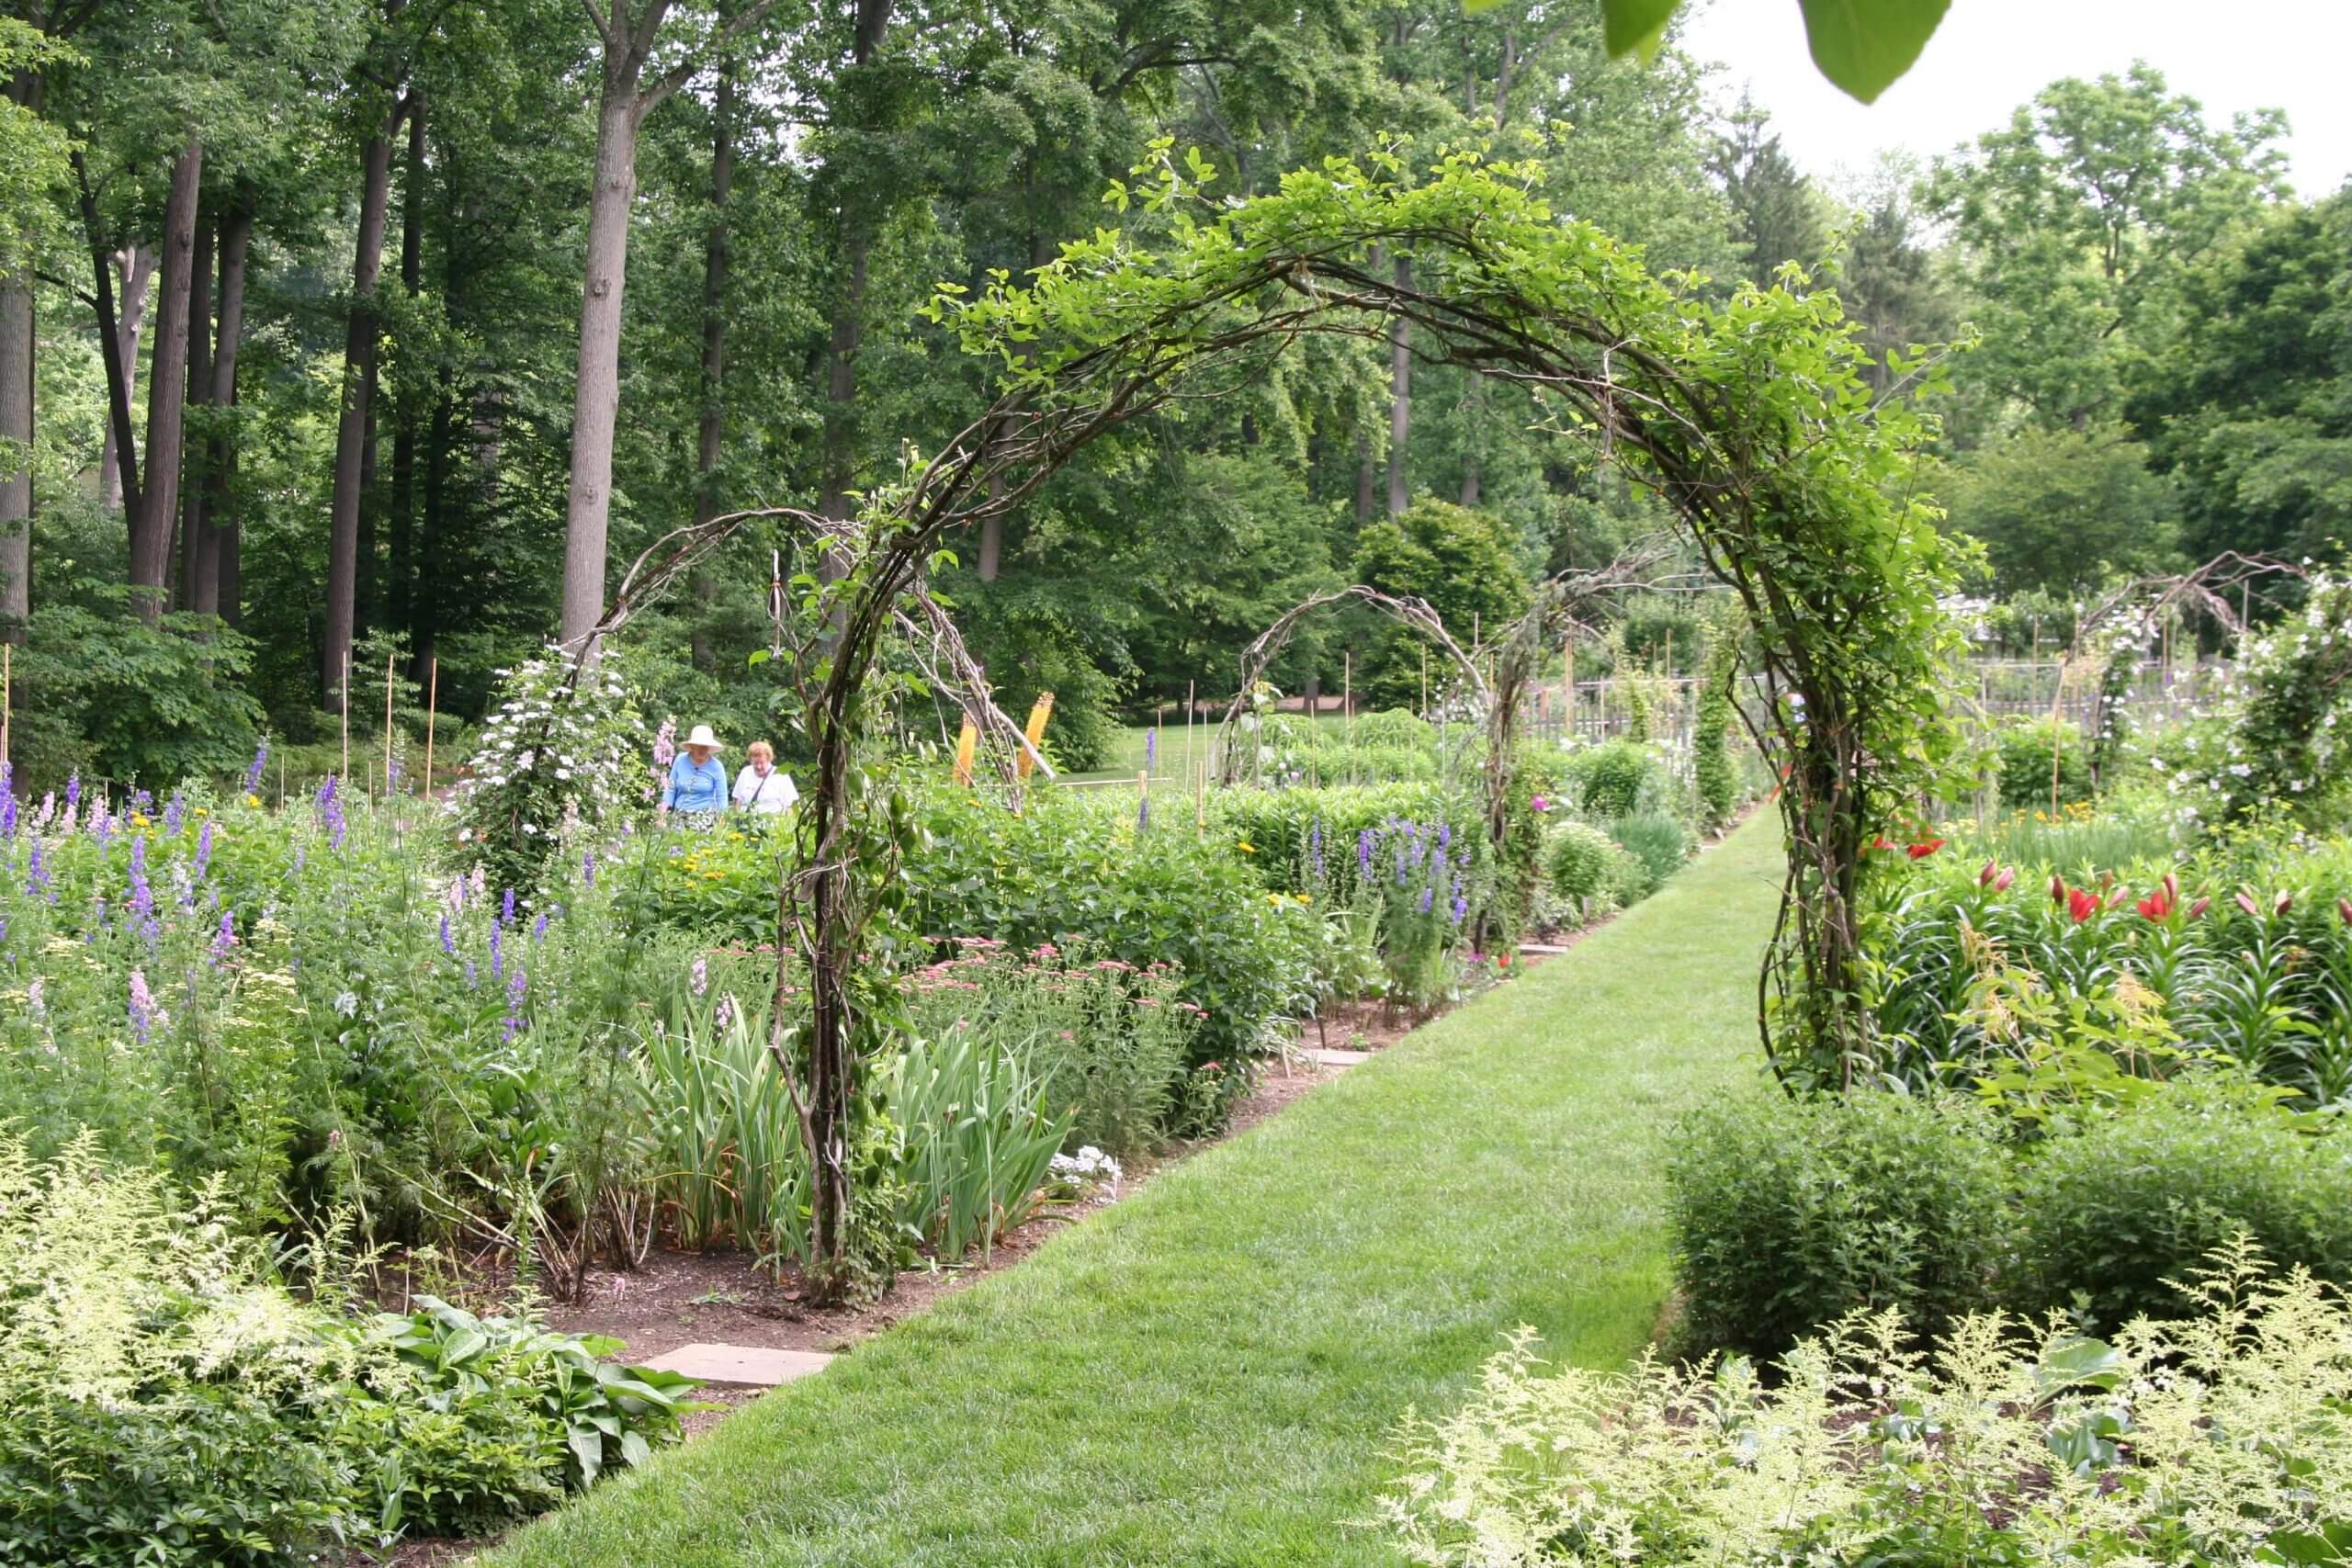 The bentwood arbors at Chanticleer Gardens in Wayne, PA are simply beautiful.